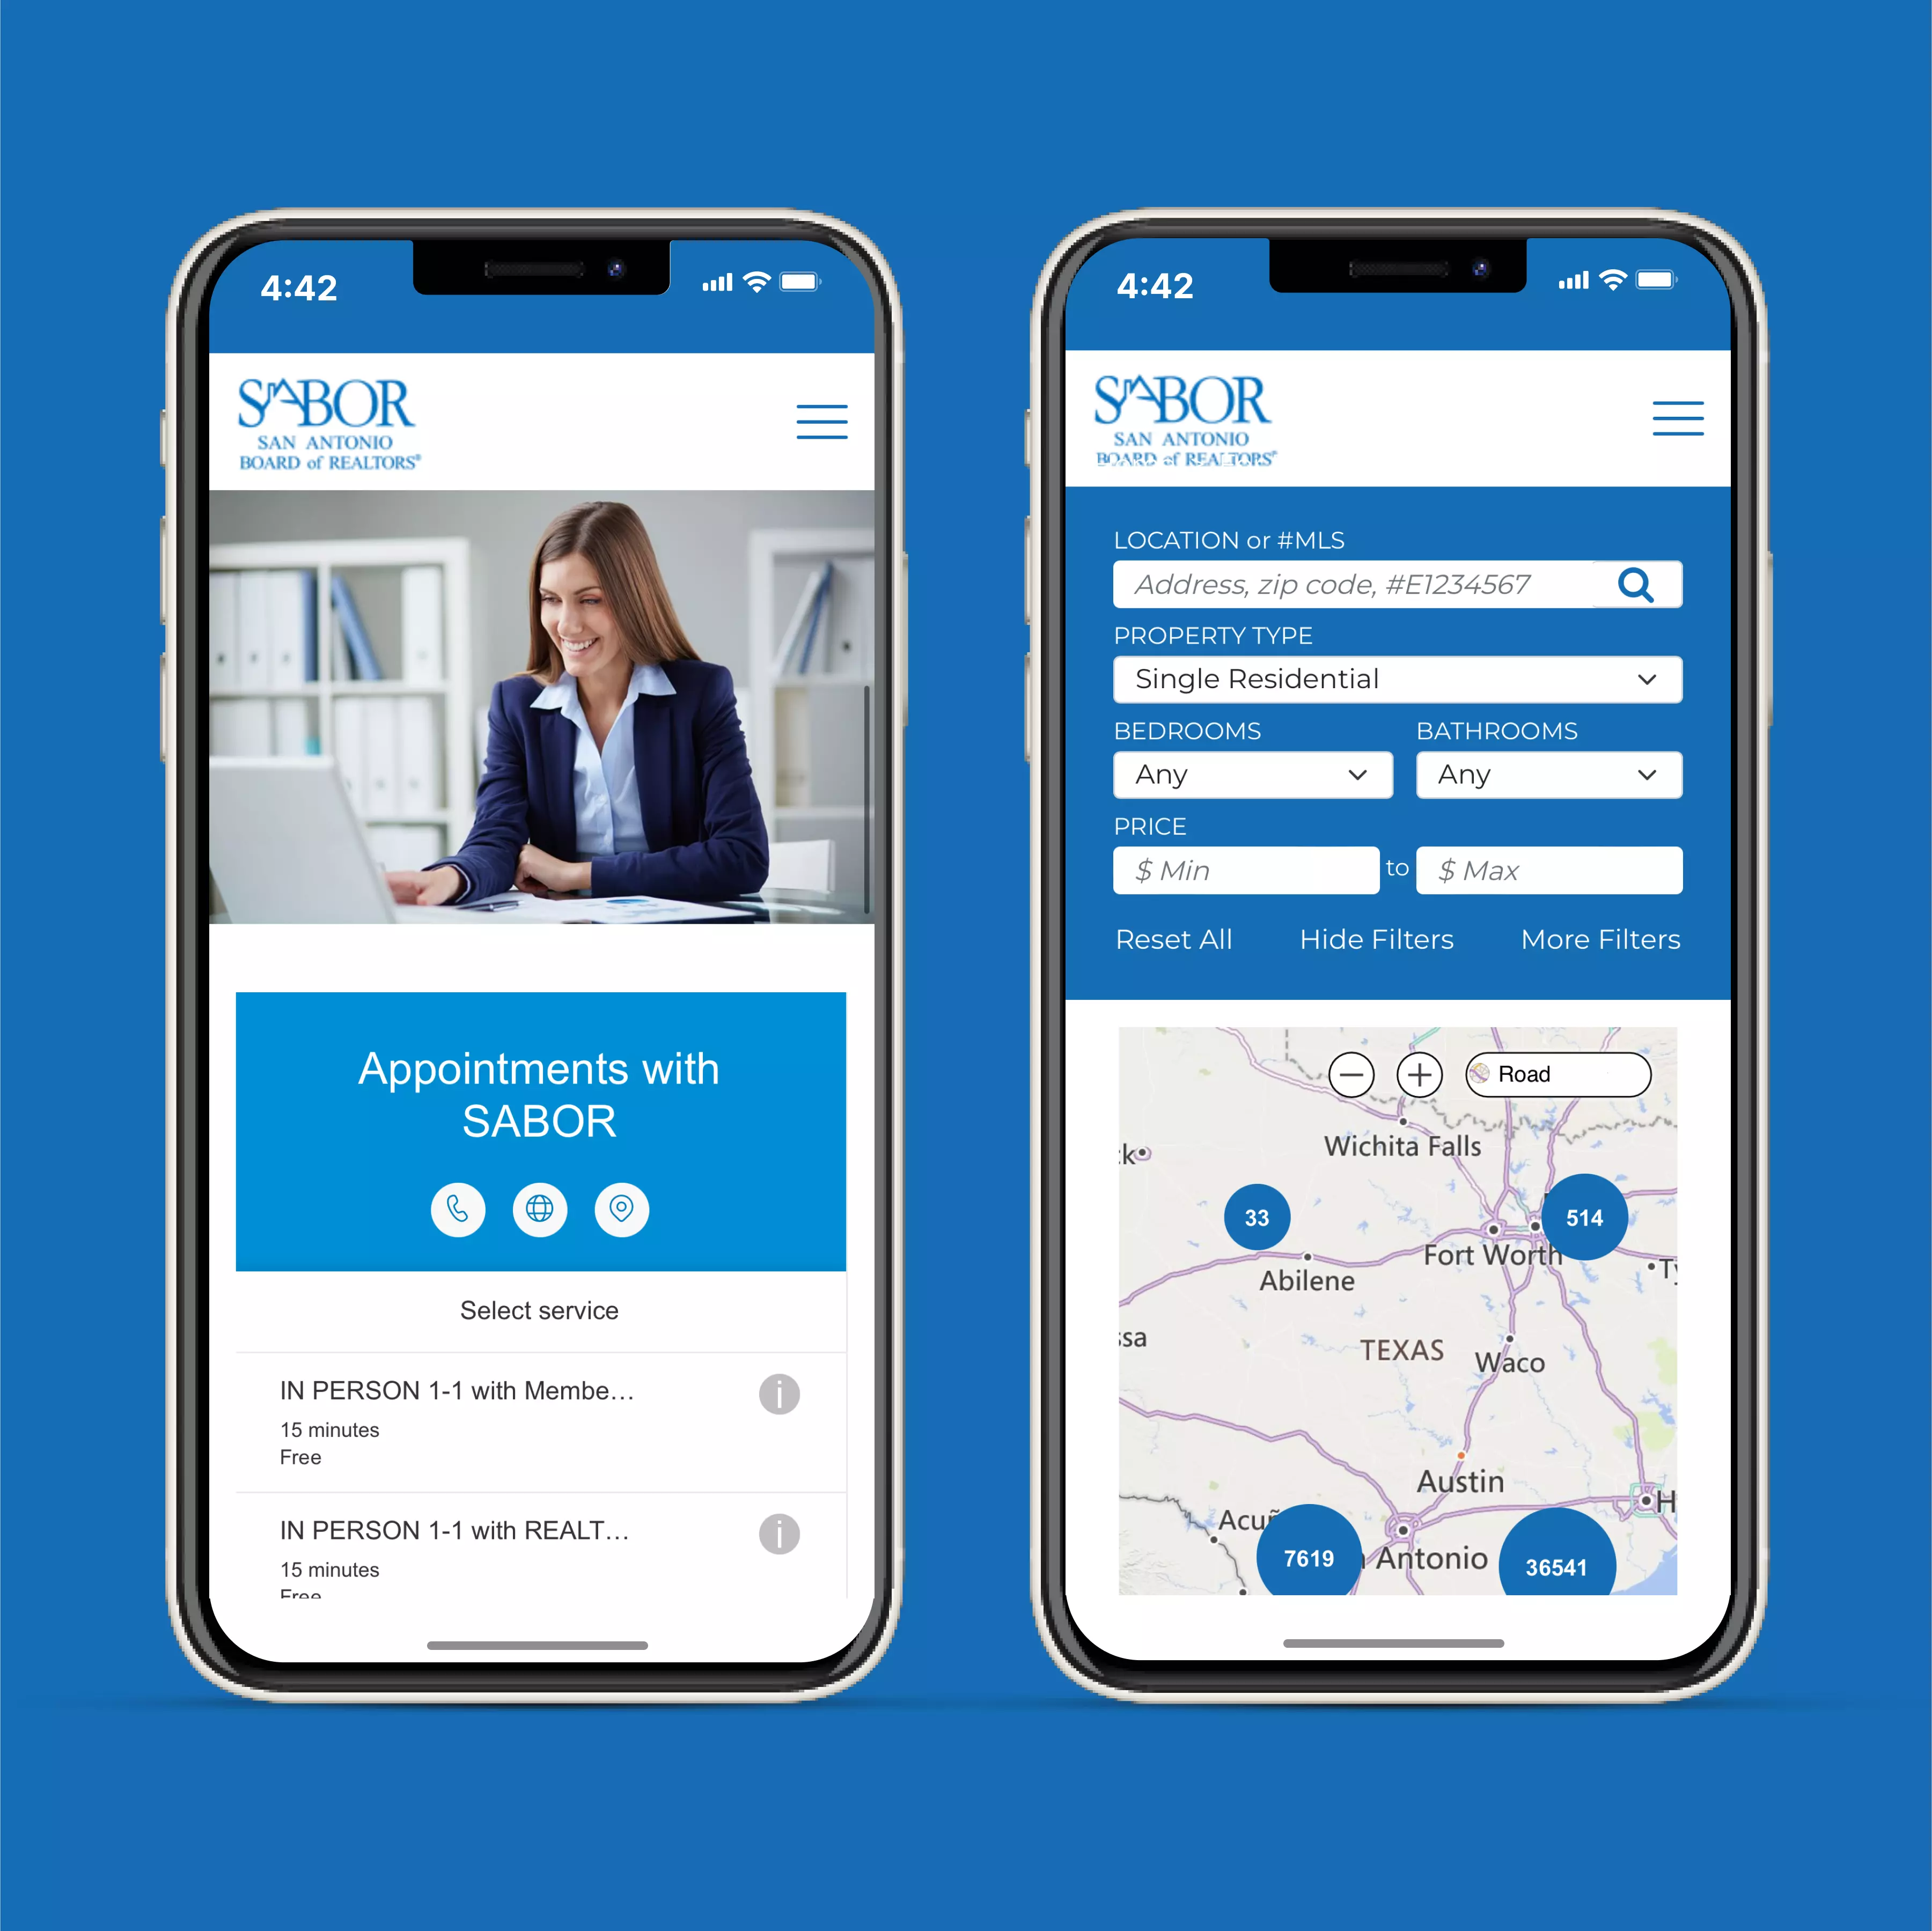 SABOR website on 2 mobile phones with blue background